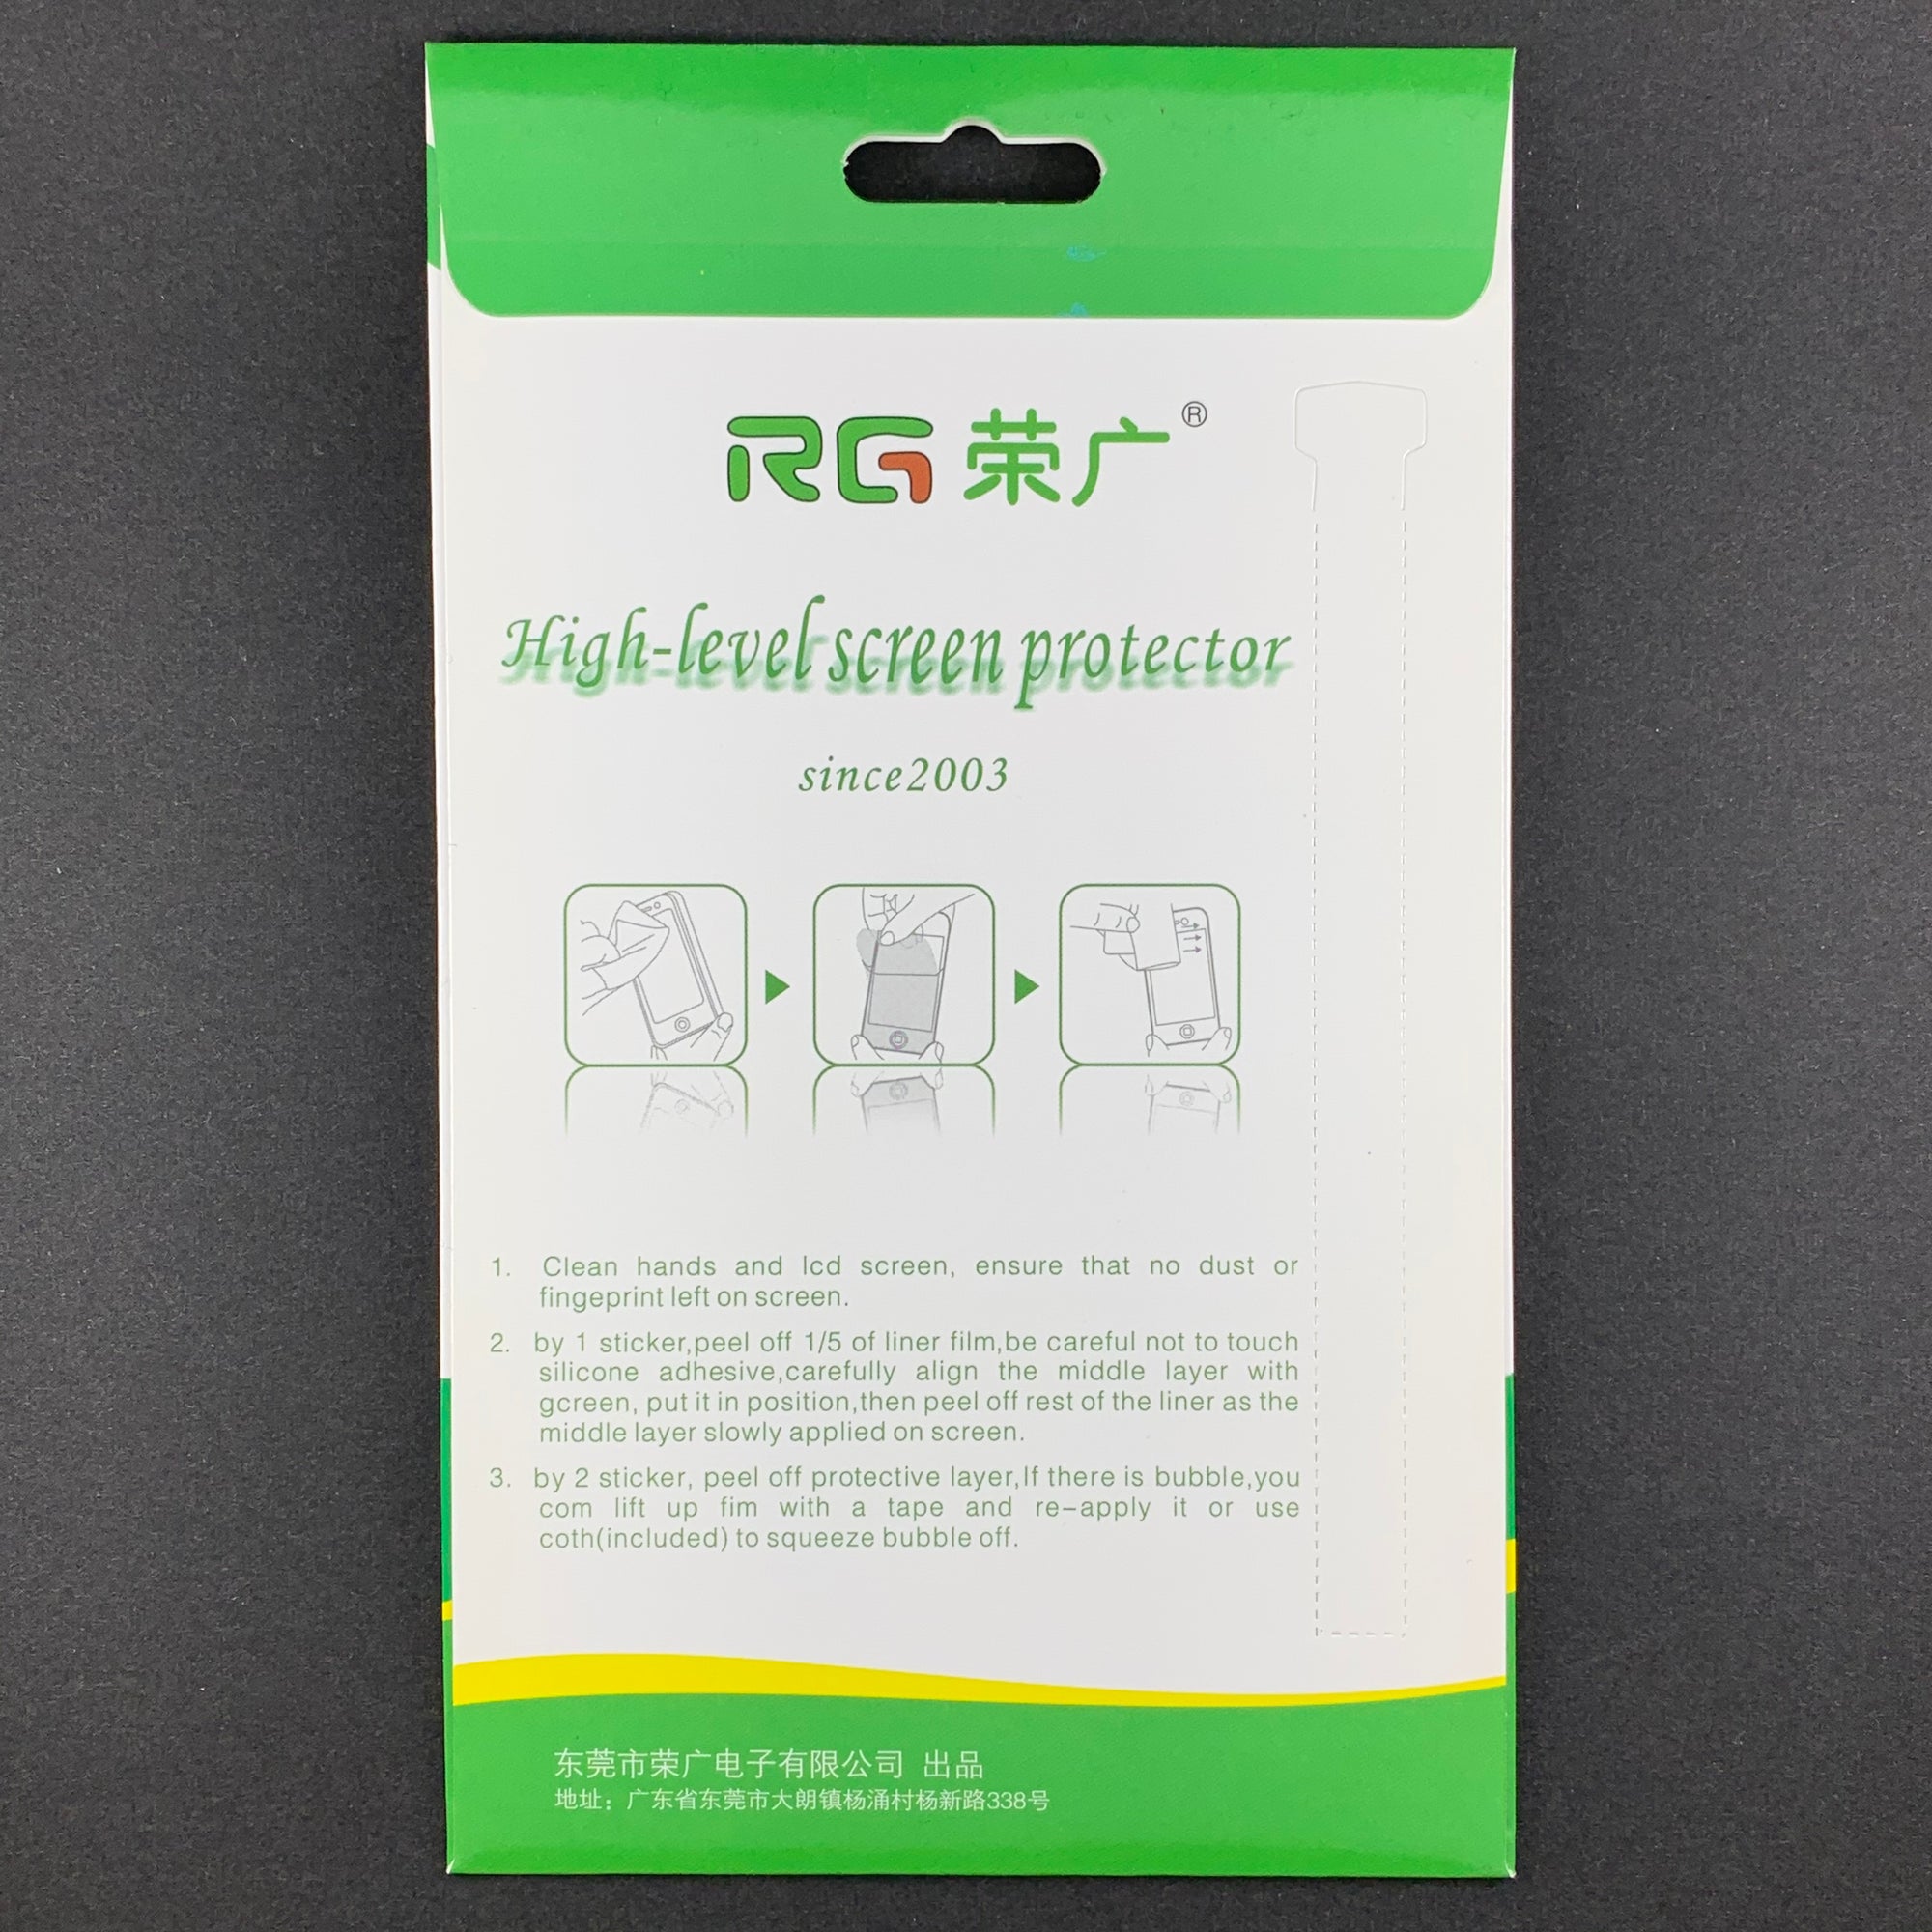 RG Professional Soft Film Screen Protector for iPad Mini 1 / 2 / 3 (CLEAR, 2-PACK)